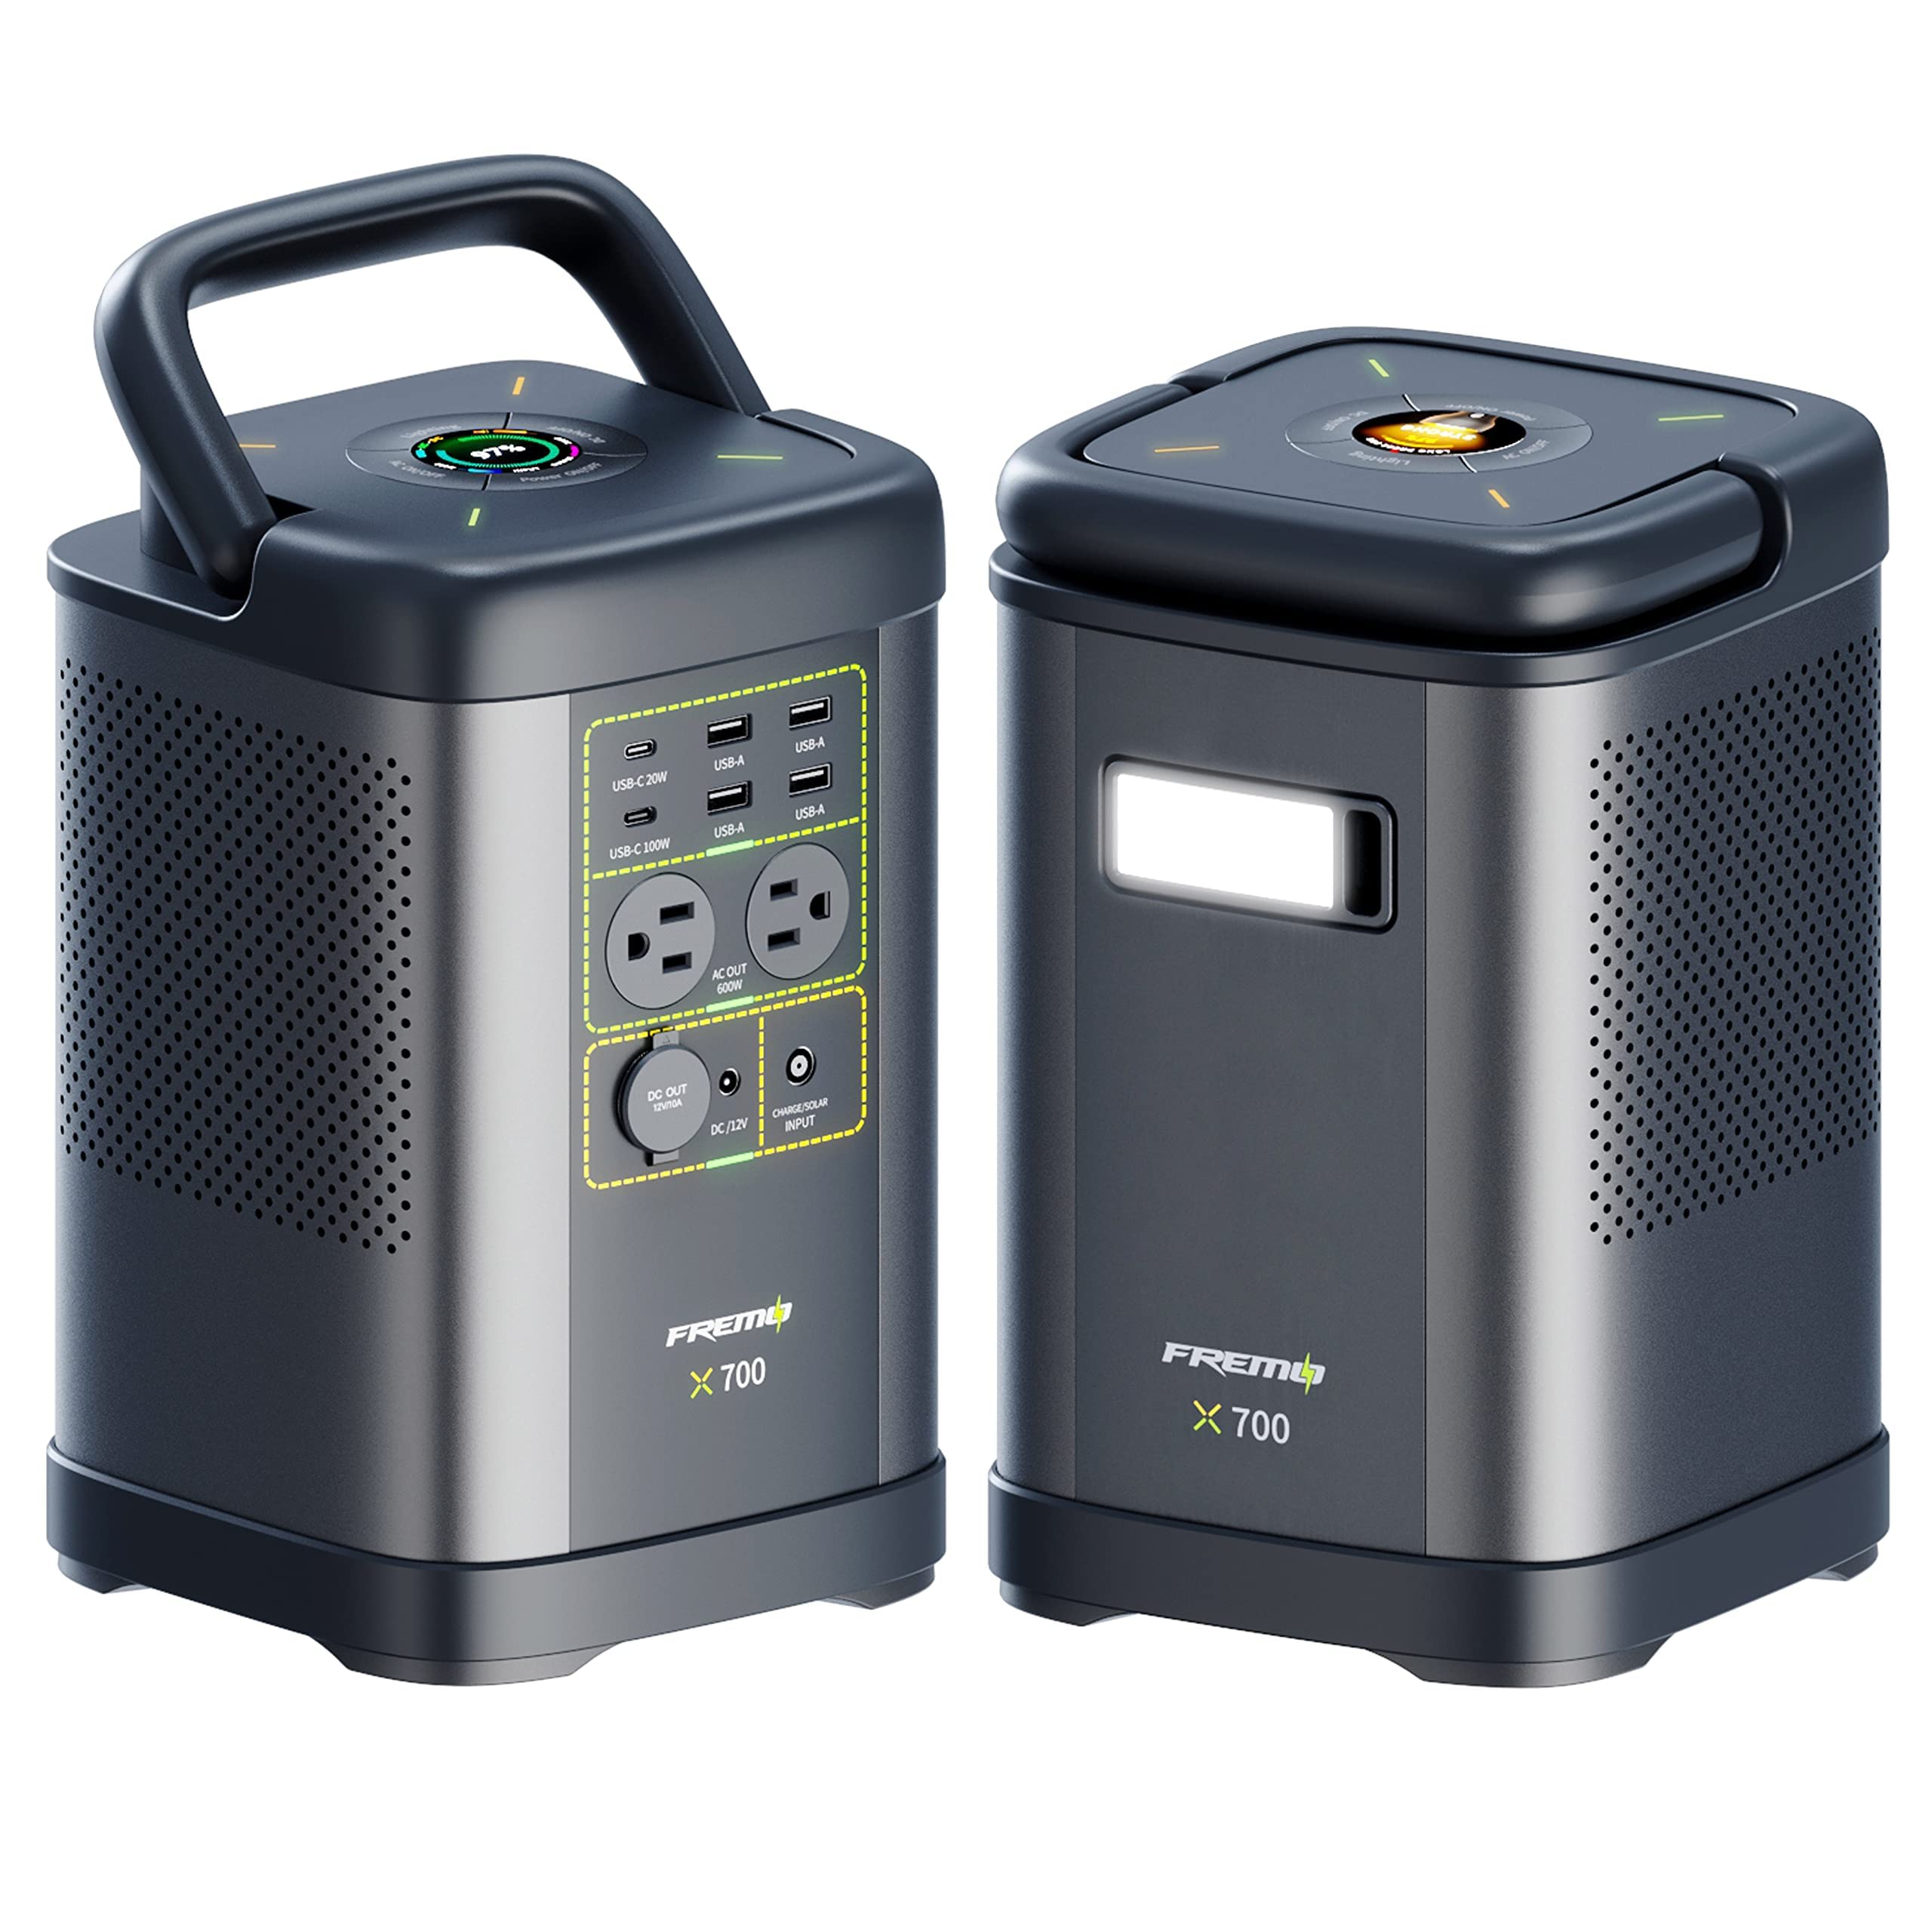 662Wh Fremo X700 LiFePo4 Portable Battery Power Station $240 + free s/h